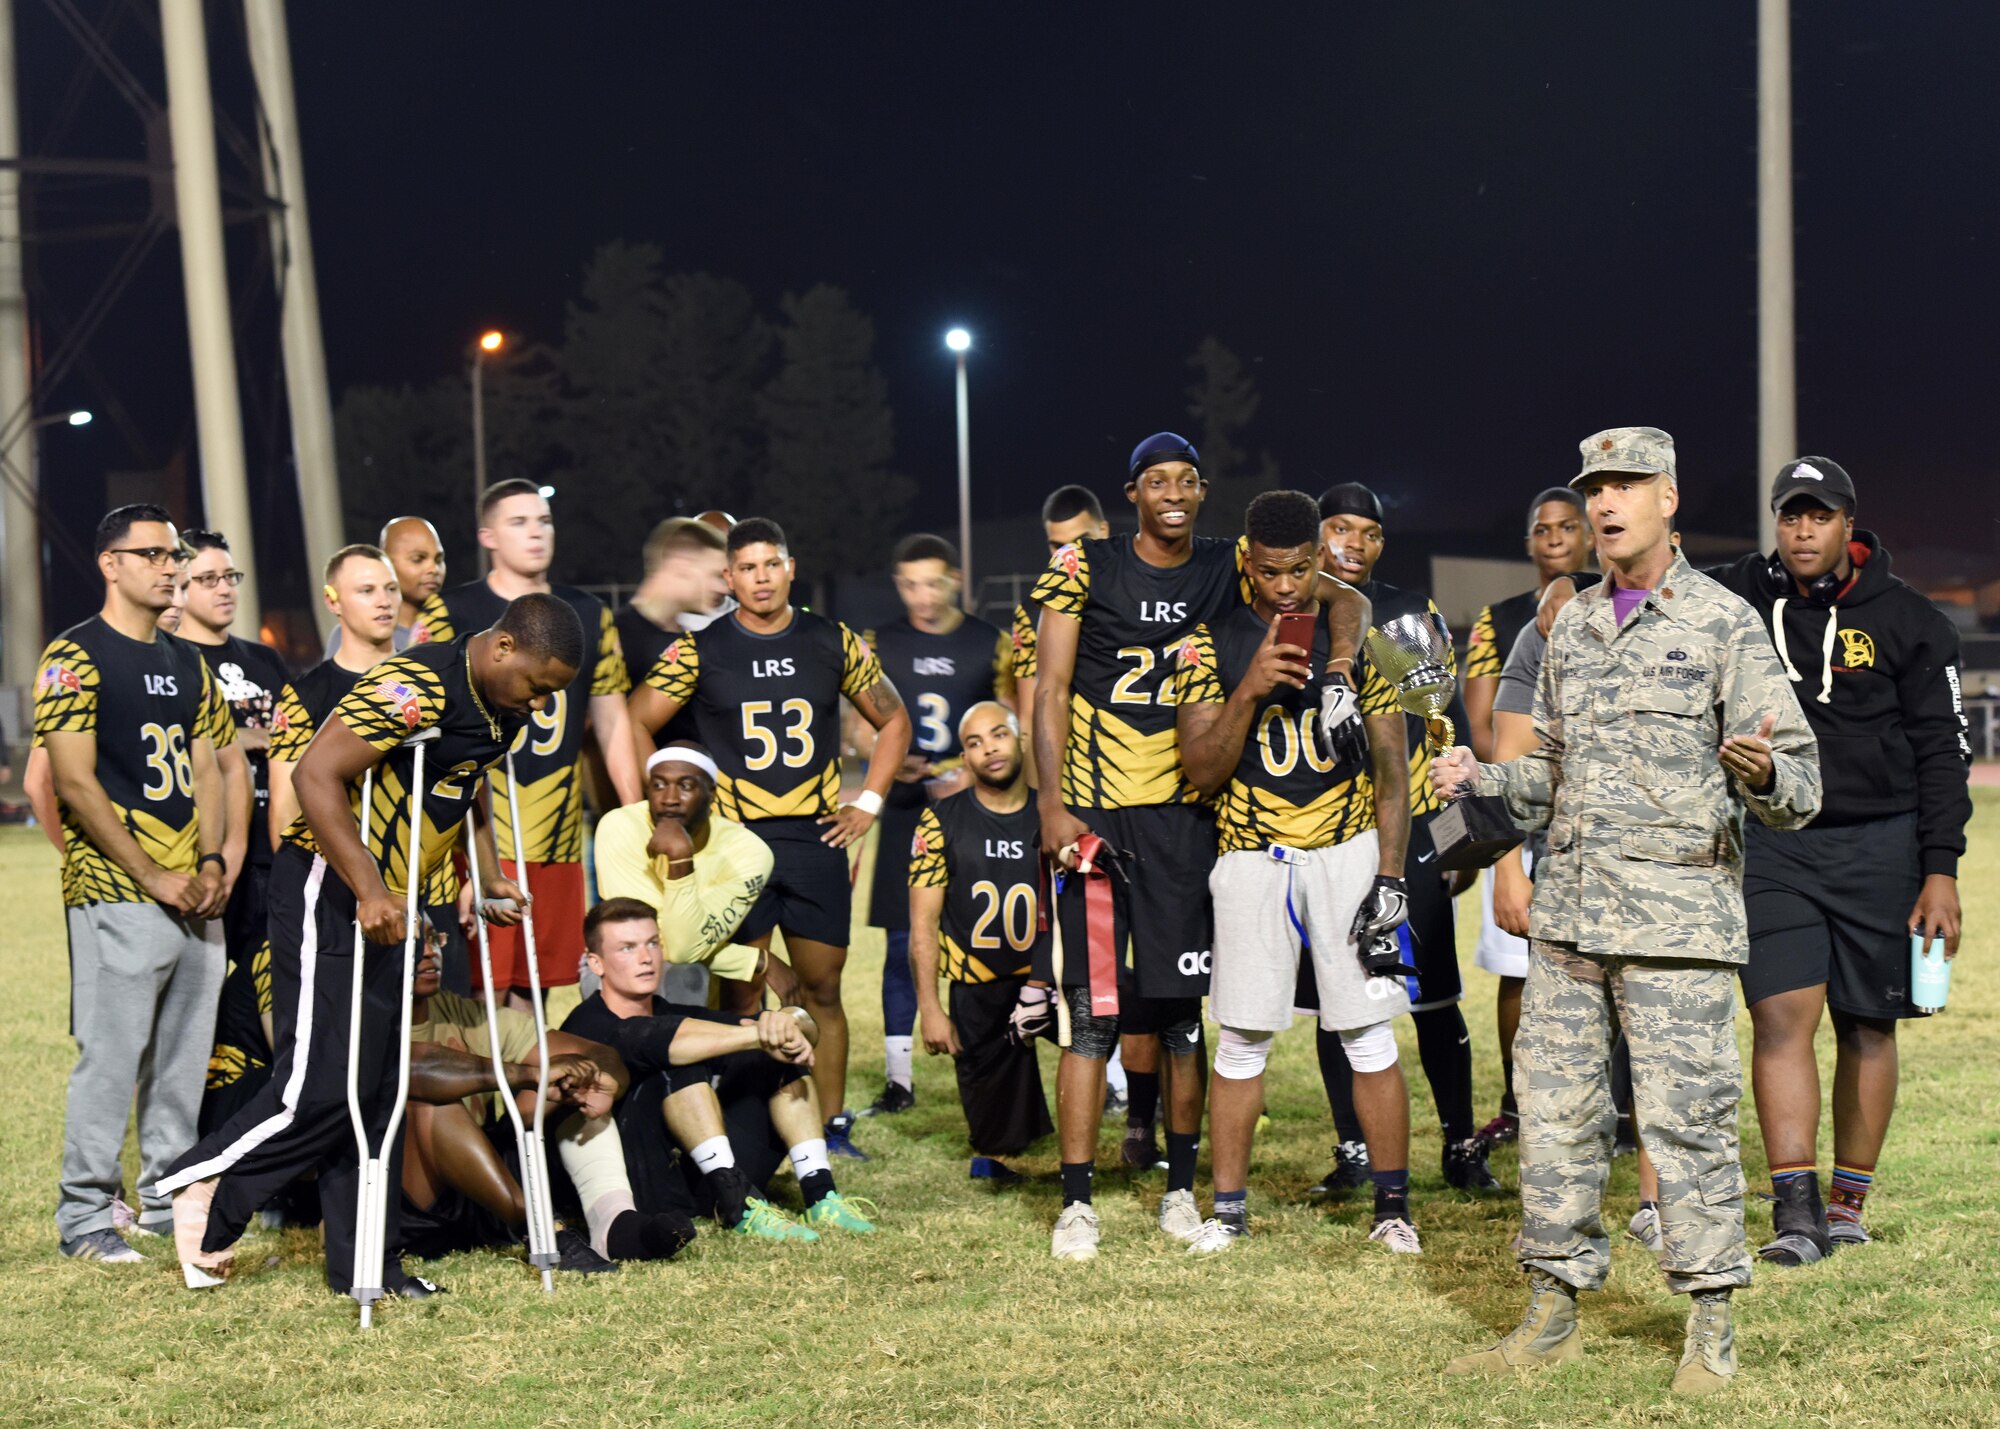 The 39th LRS team finished the intramural flag football season undefeated.